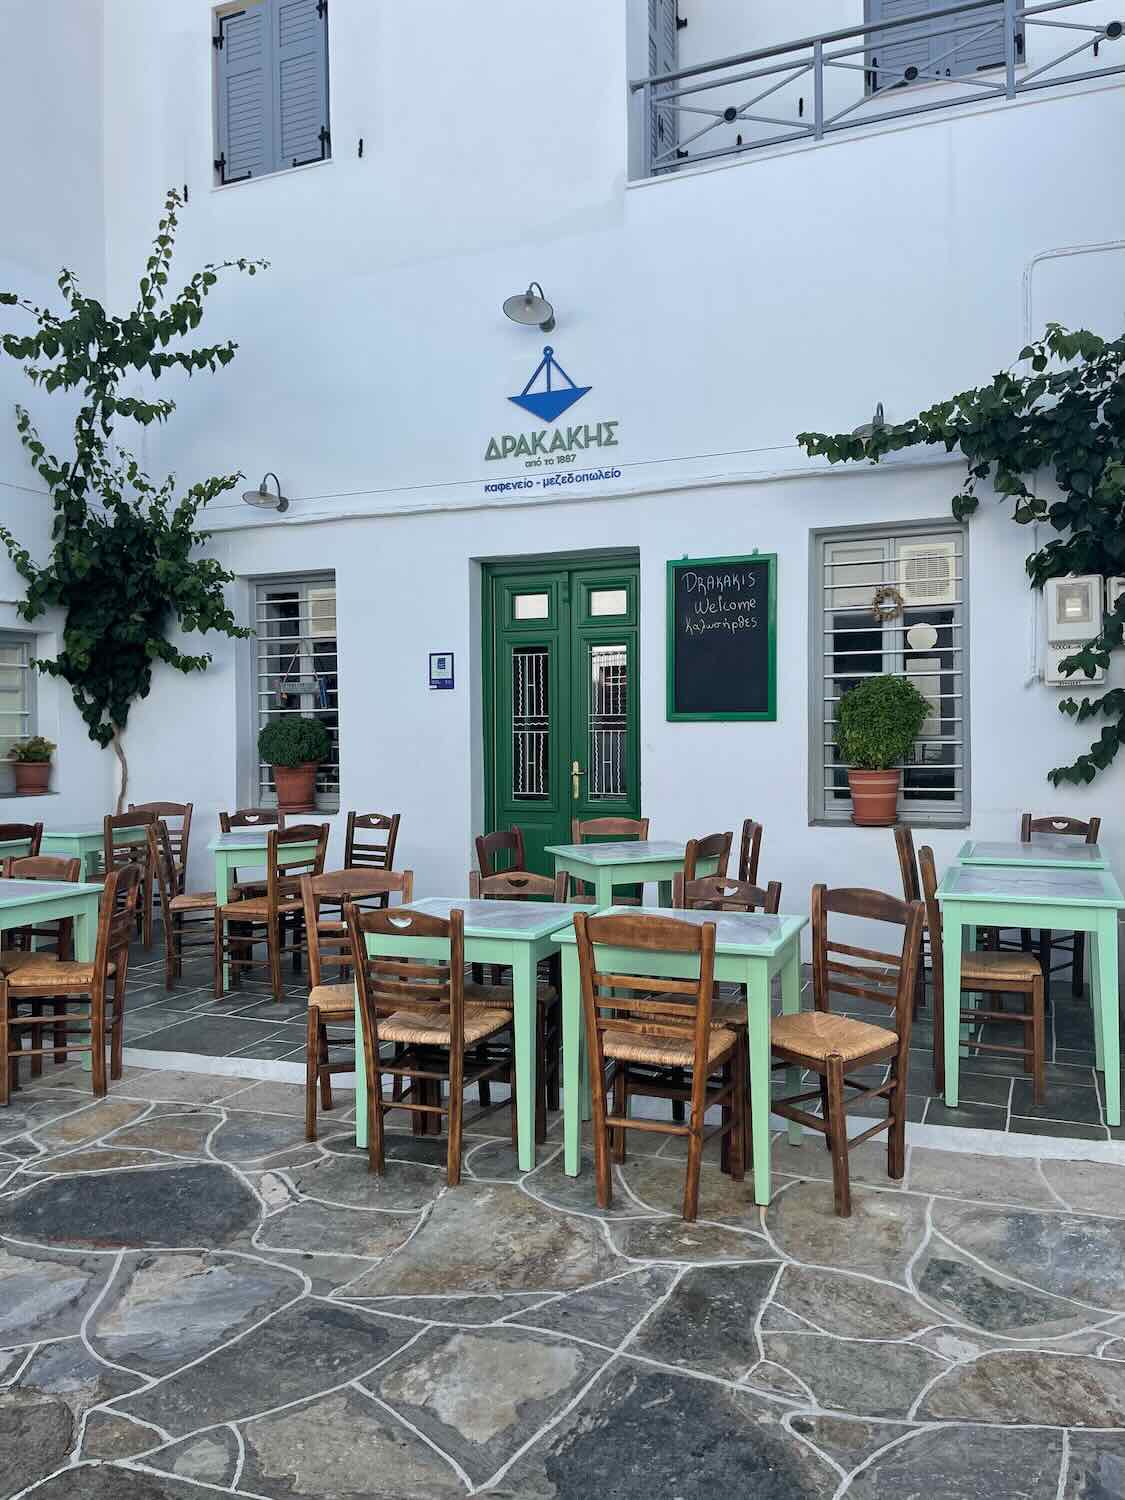 A cozy outdoor café in Sifnos with mint green chairs and wooden tables, inviting visitors to relax and dine.